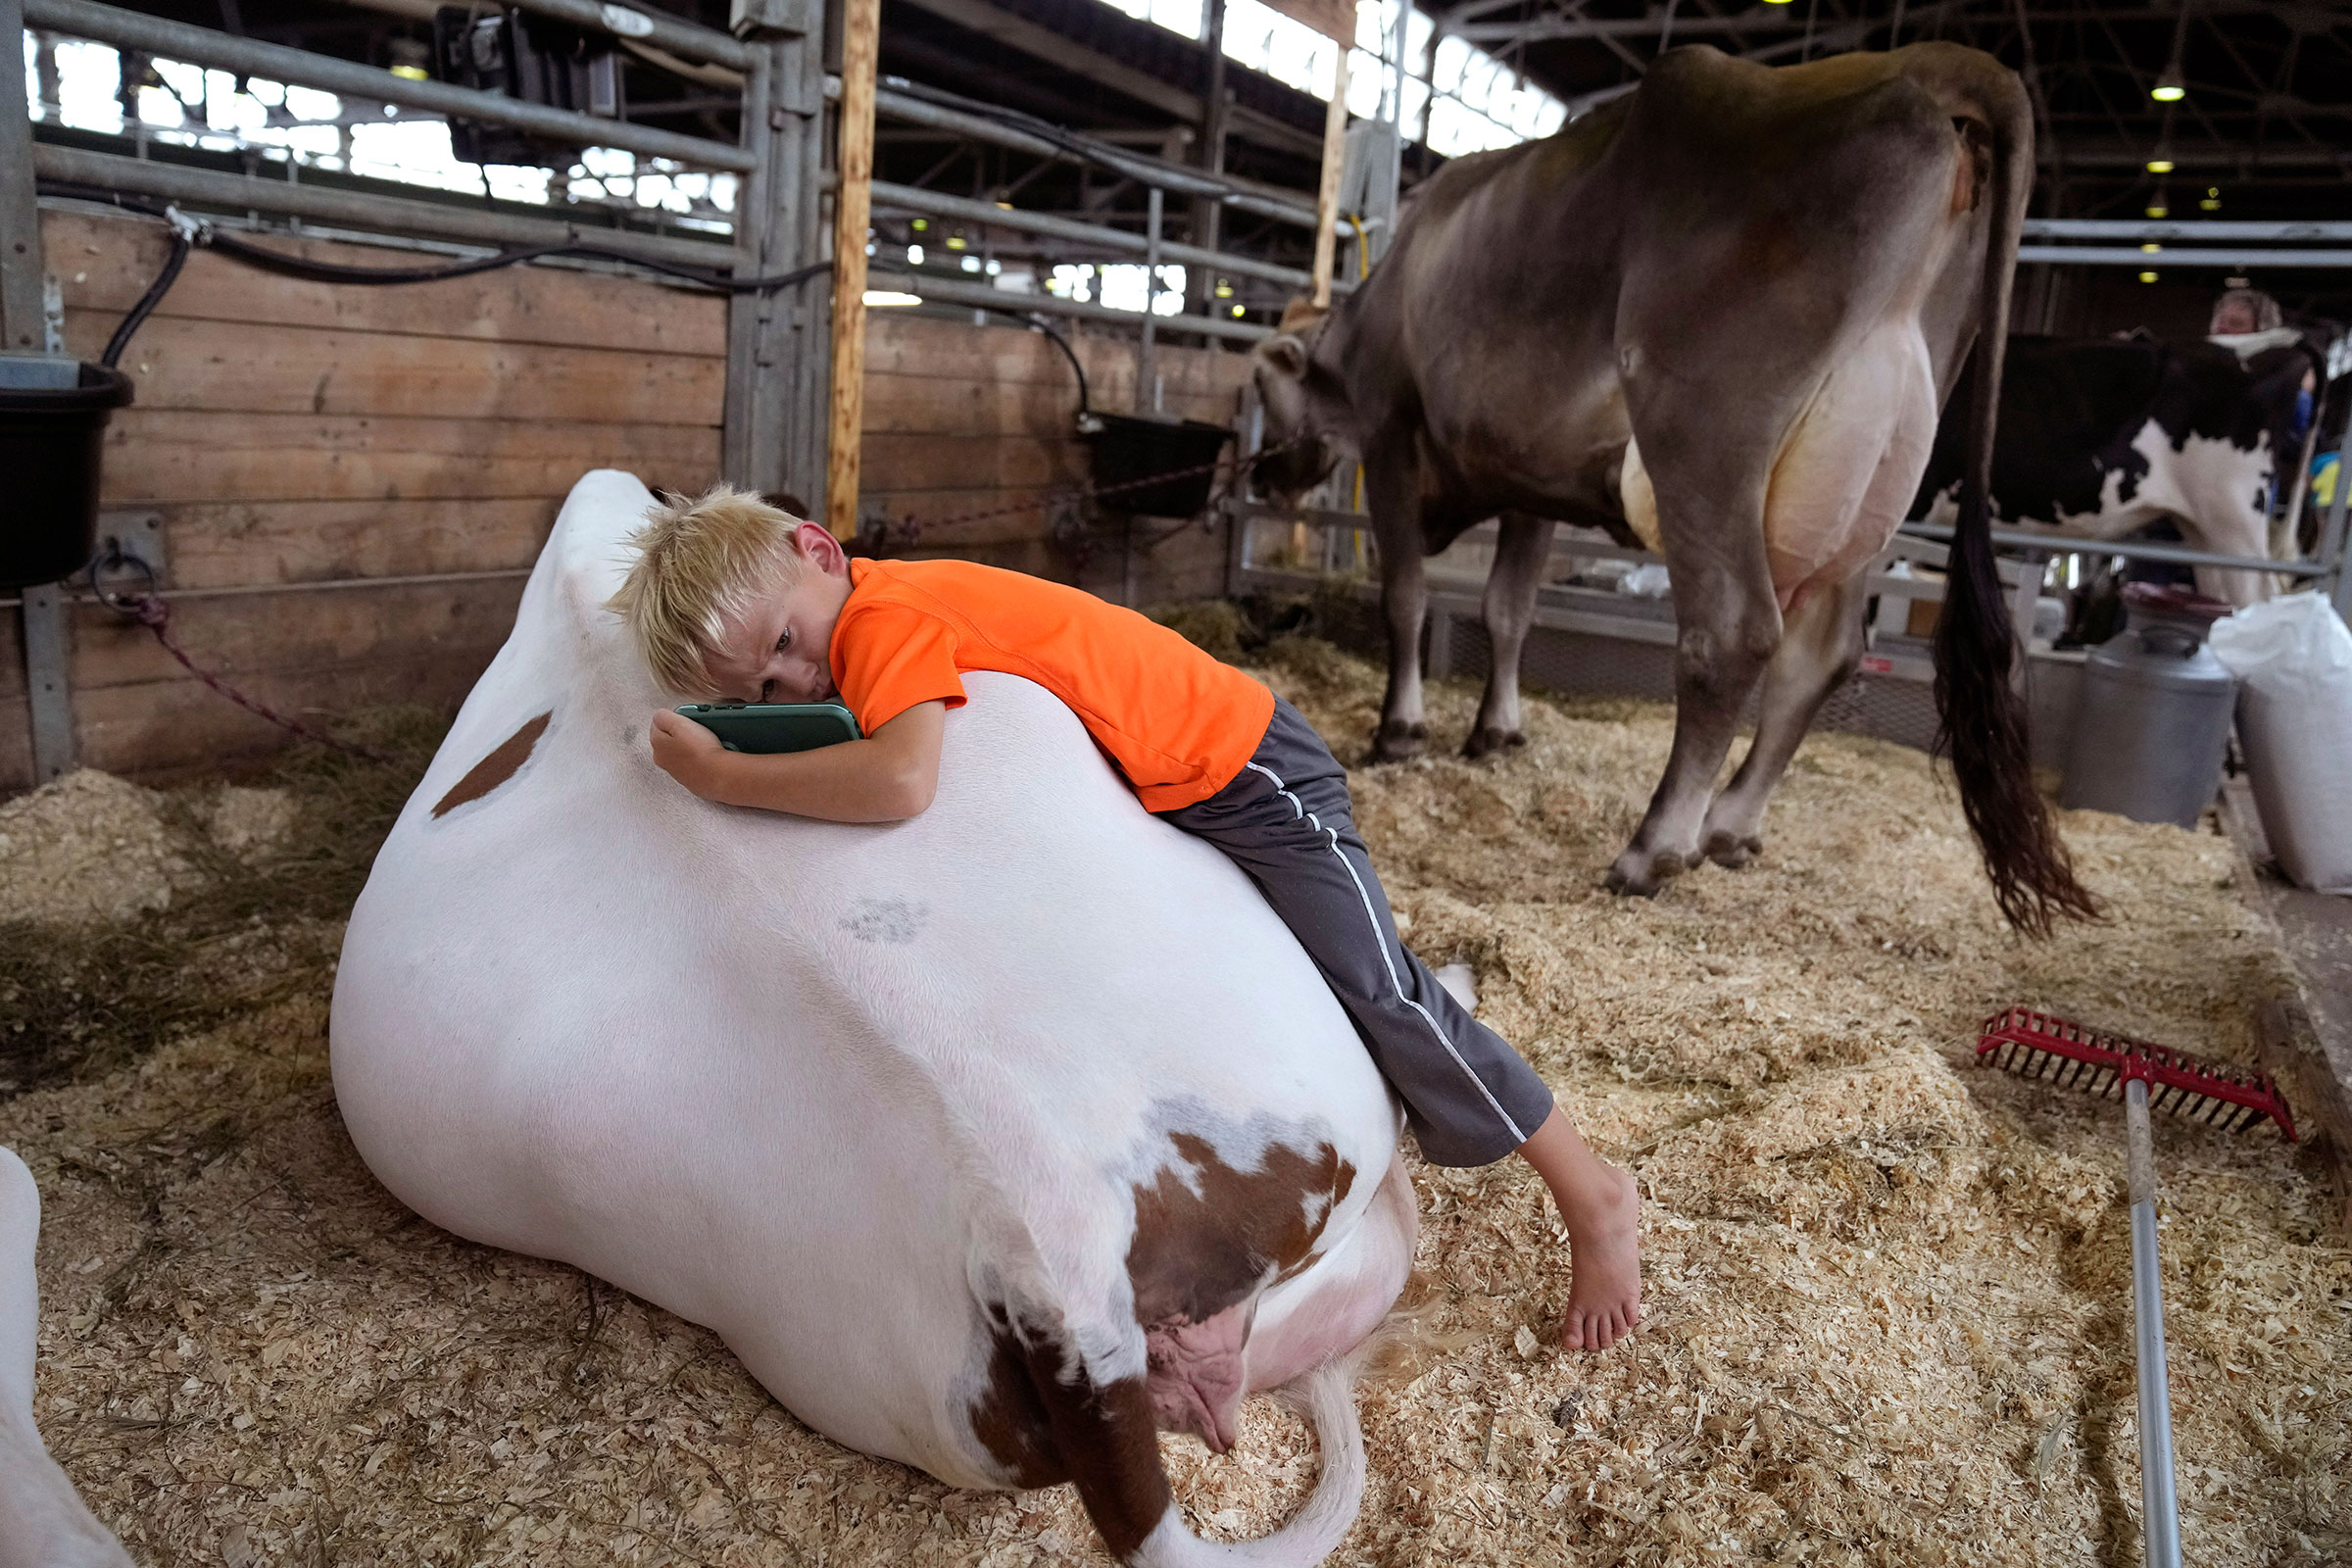 Five-year-old Jack Sawyer, of Dillon, Iowa, lays on the back of a cow in the cattle barn on Aug. 9. (Charlie Neibergall—AP)